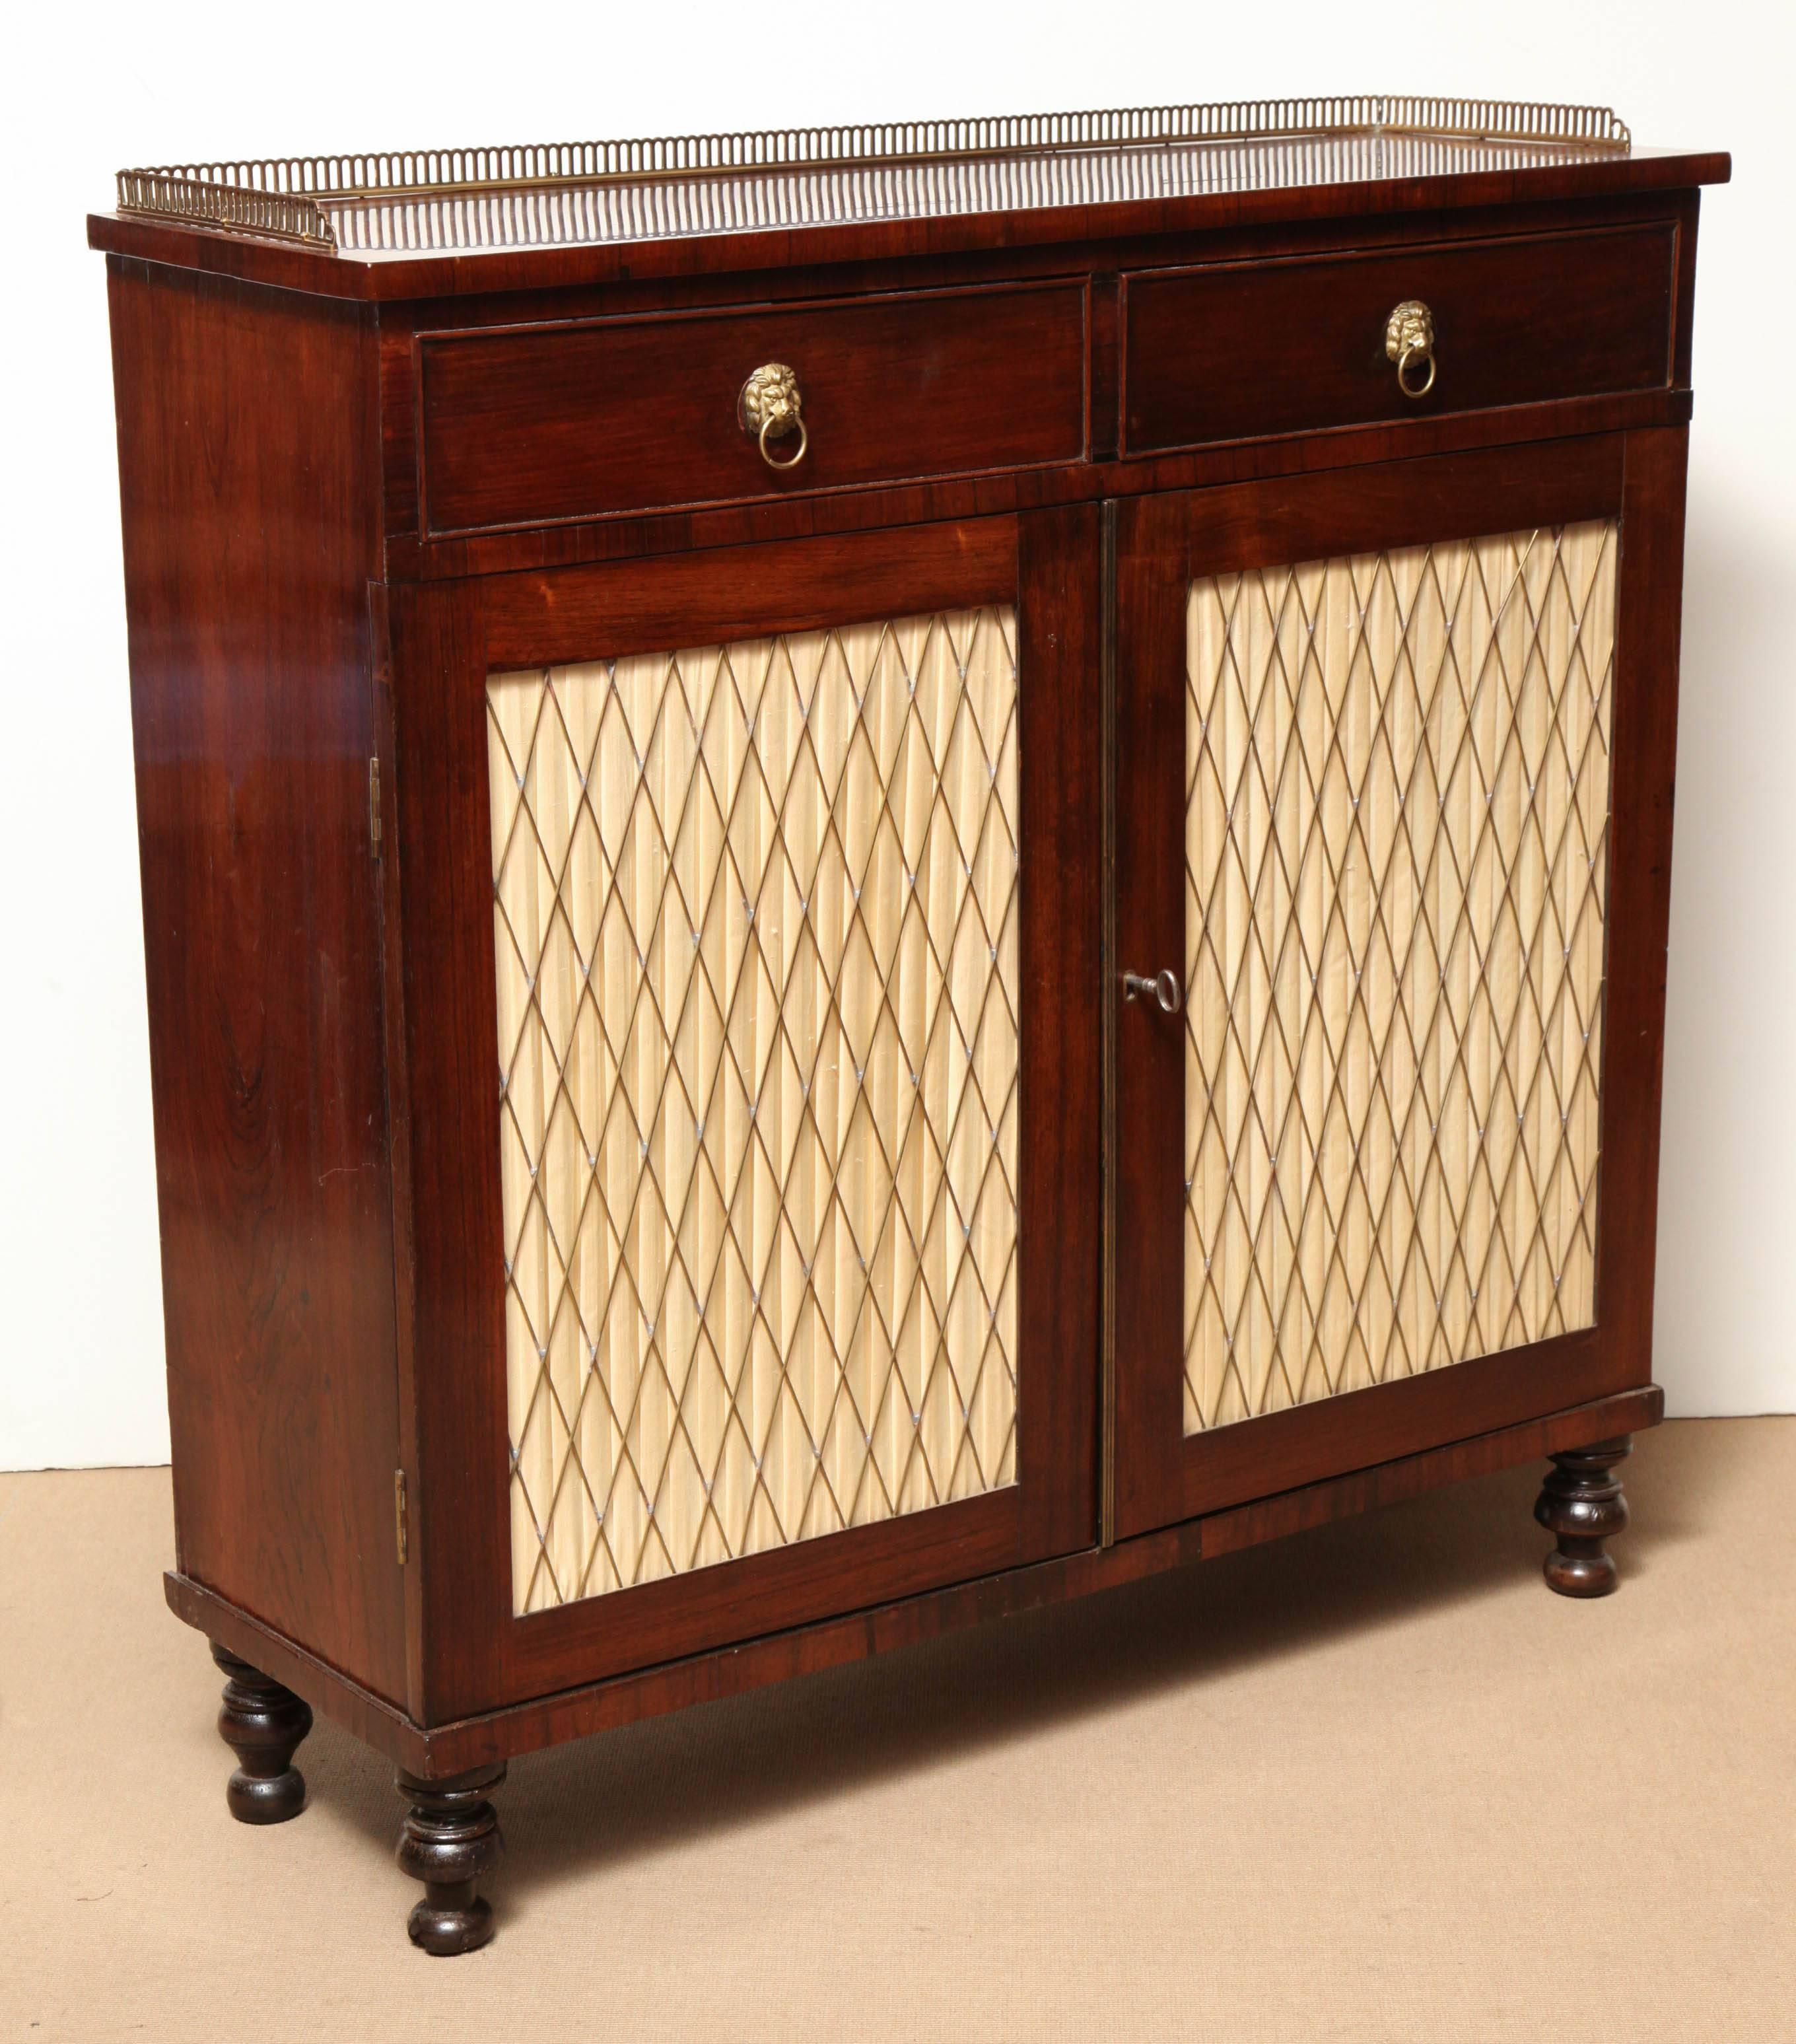 English Regency Cabinet with Two Drawers, Grill Doors and a Gallery